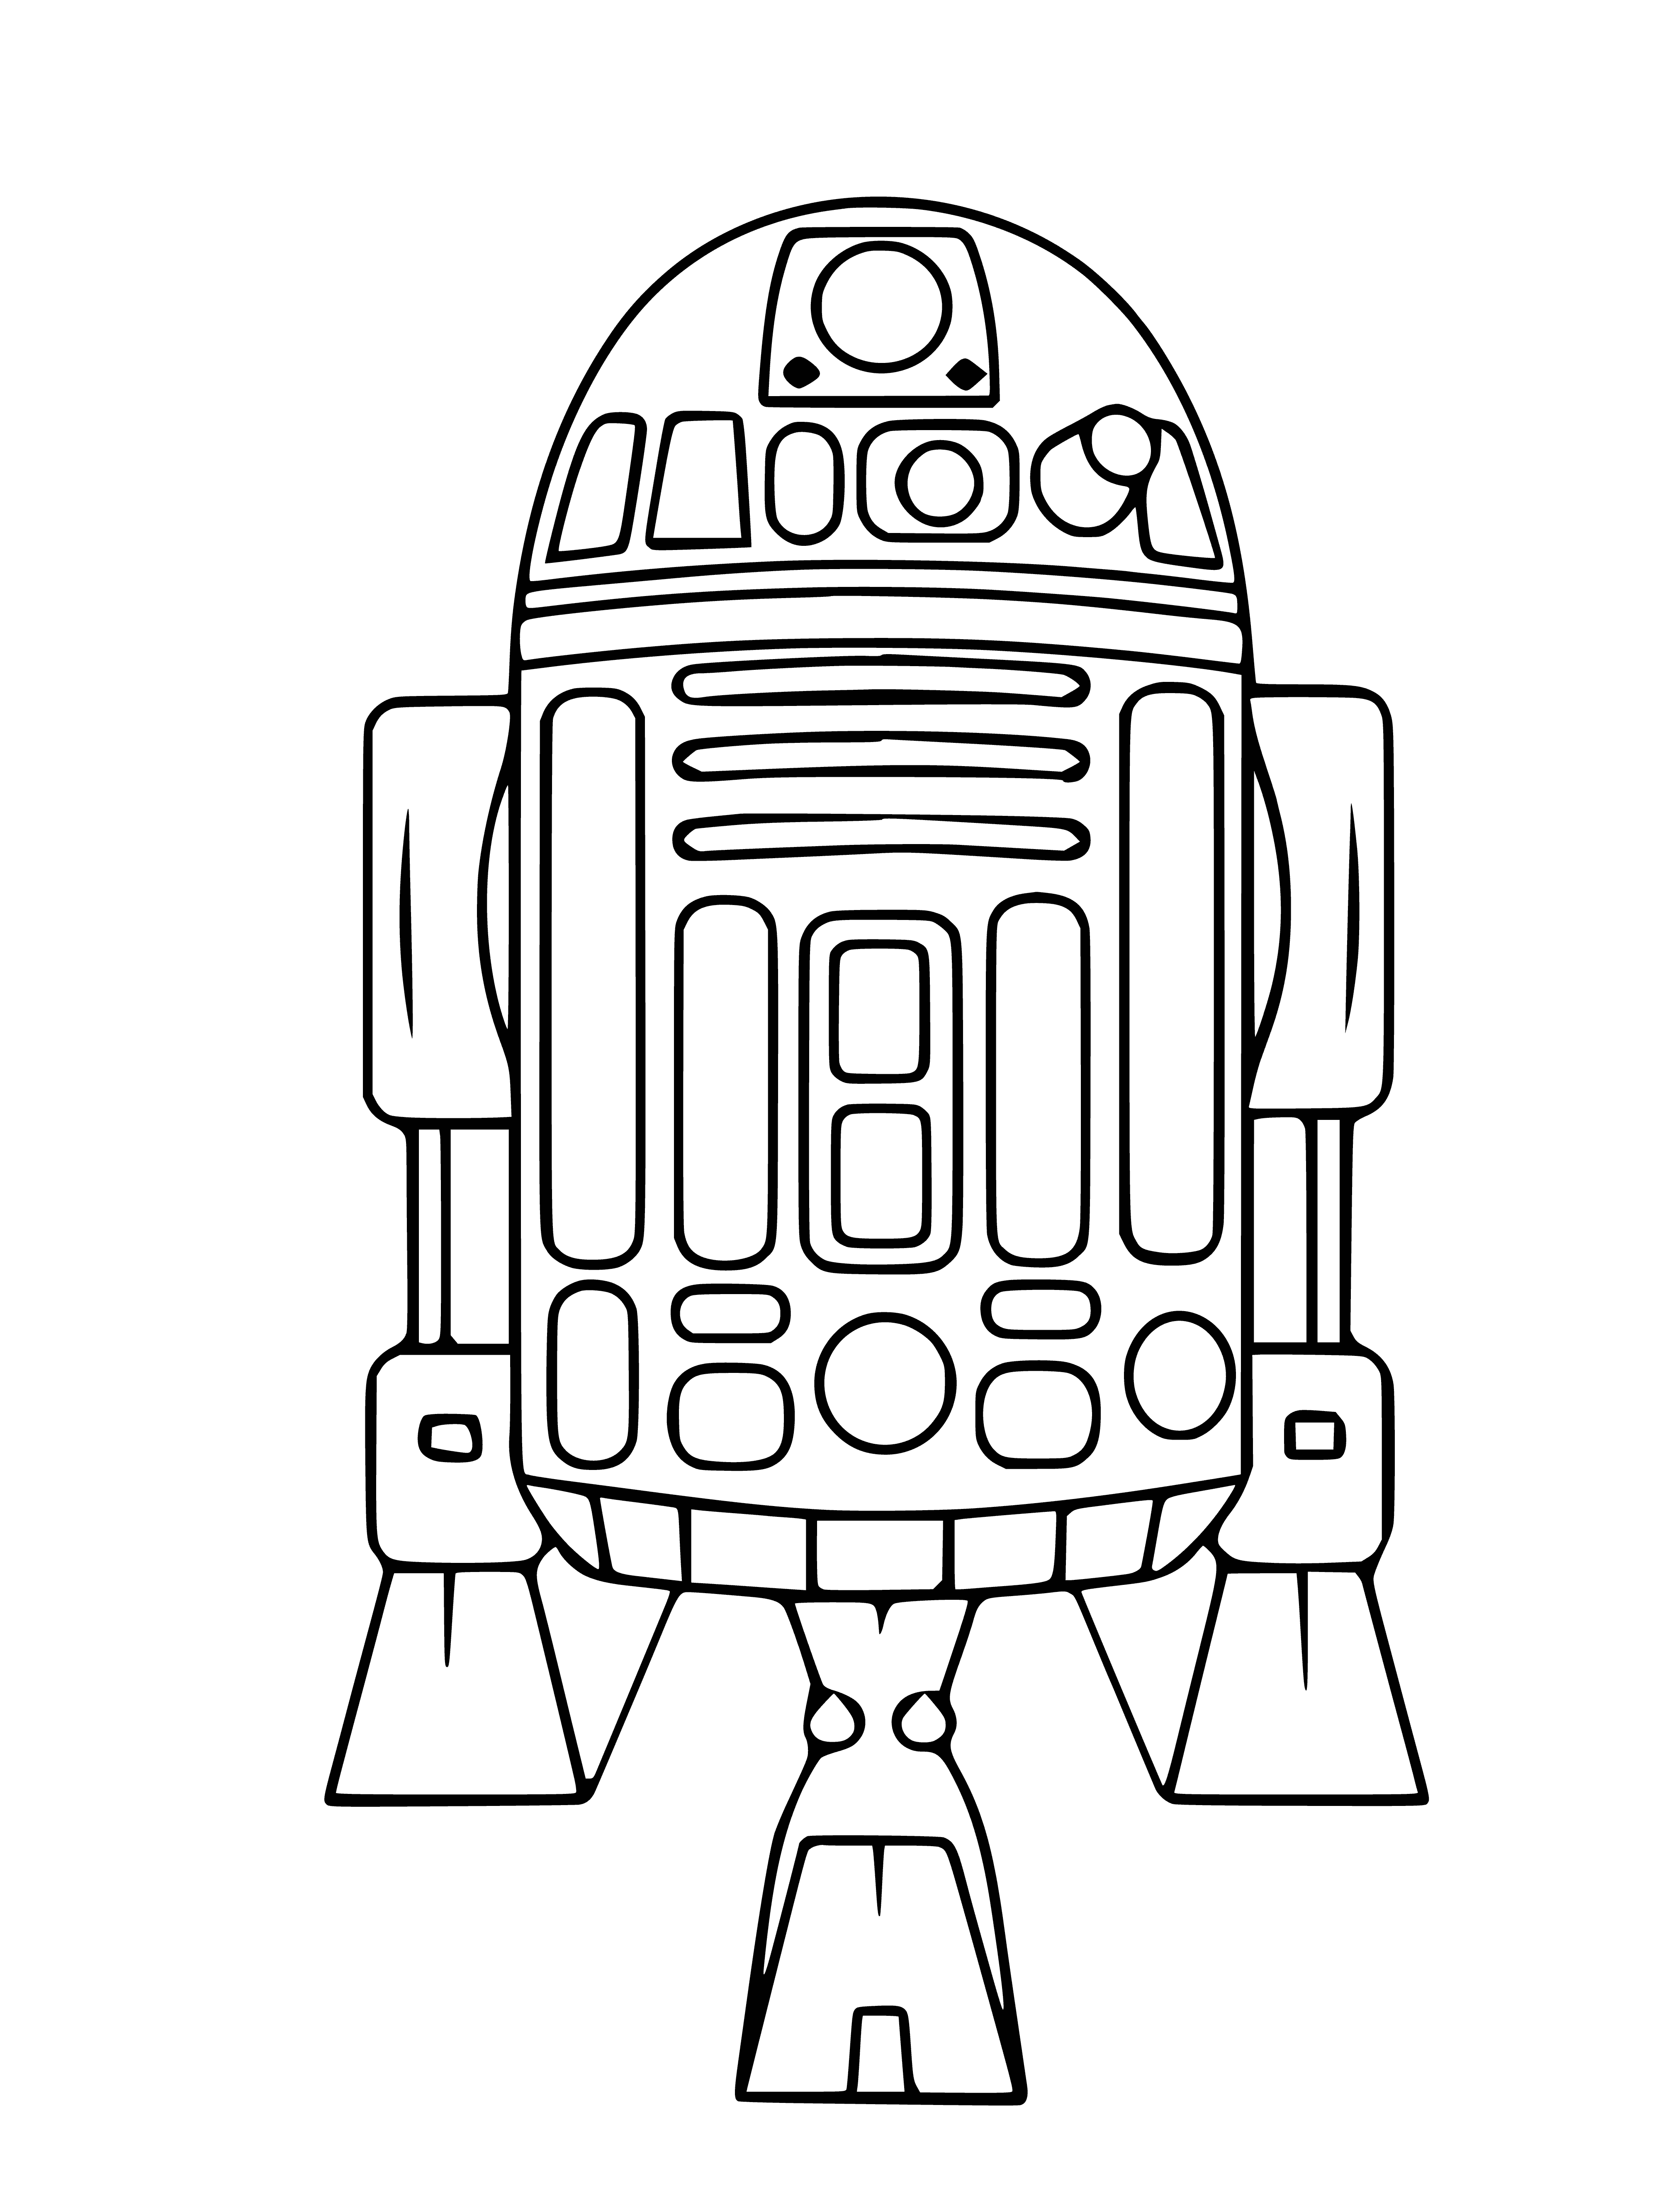 Astro-droid R2-D2 coloring page